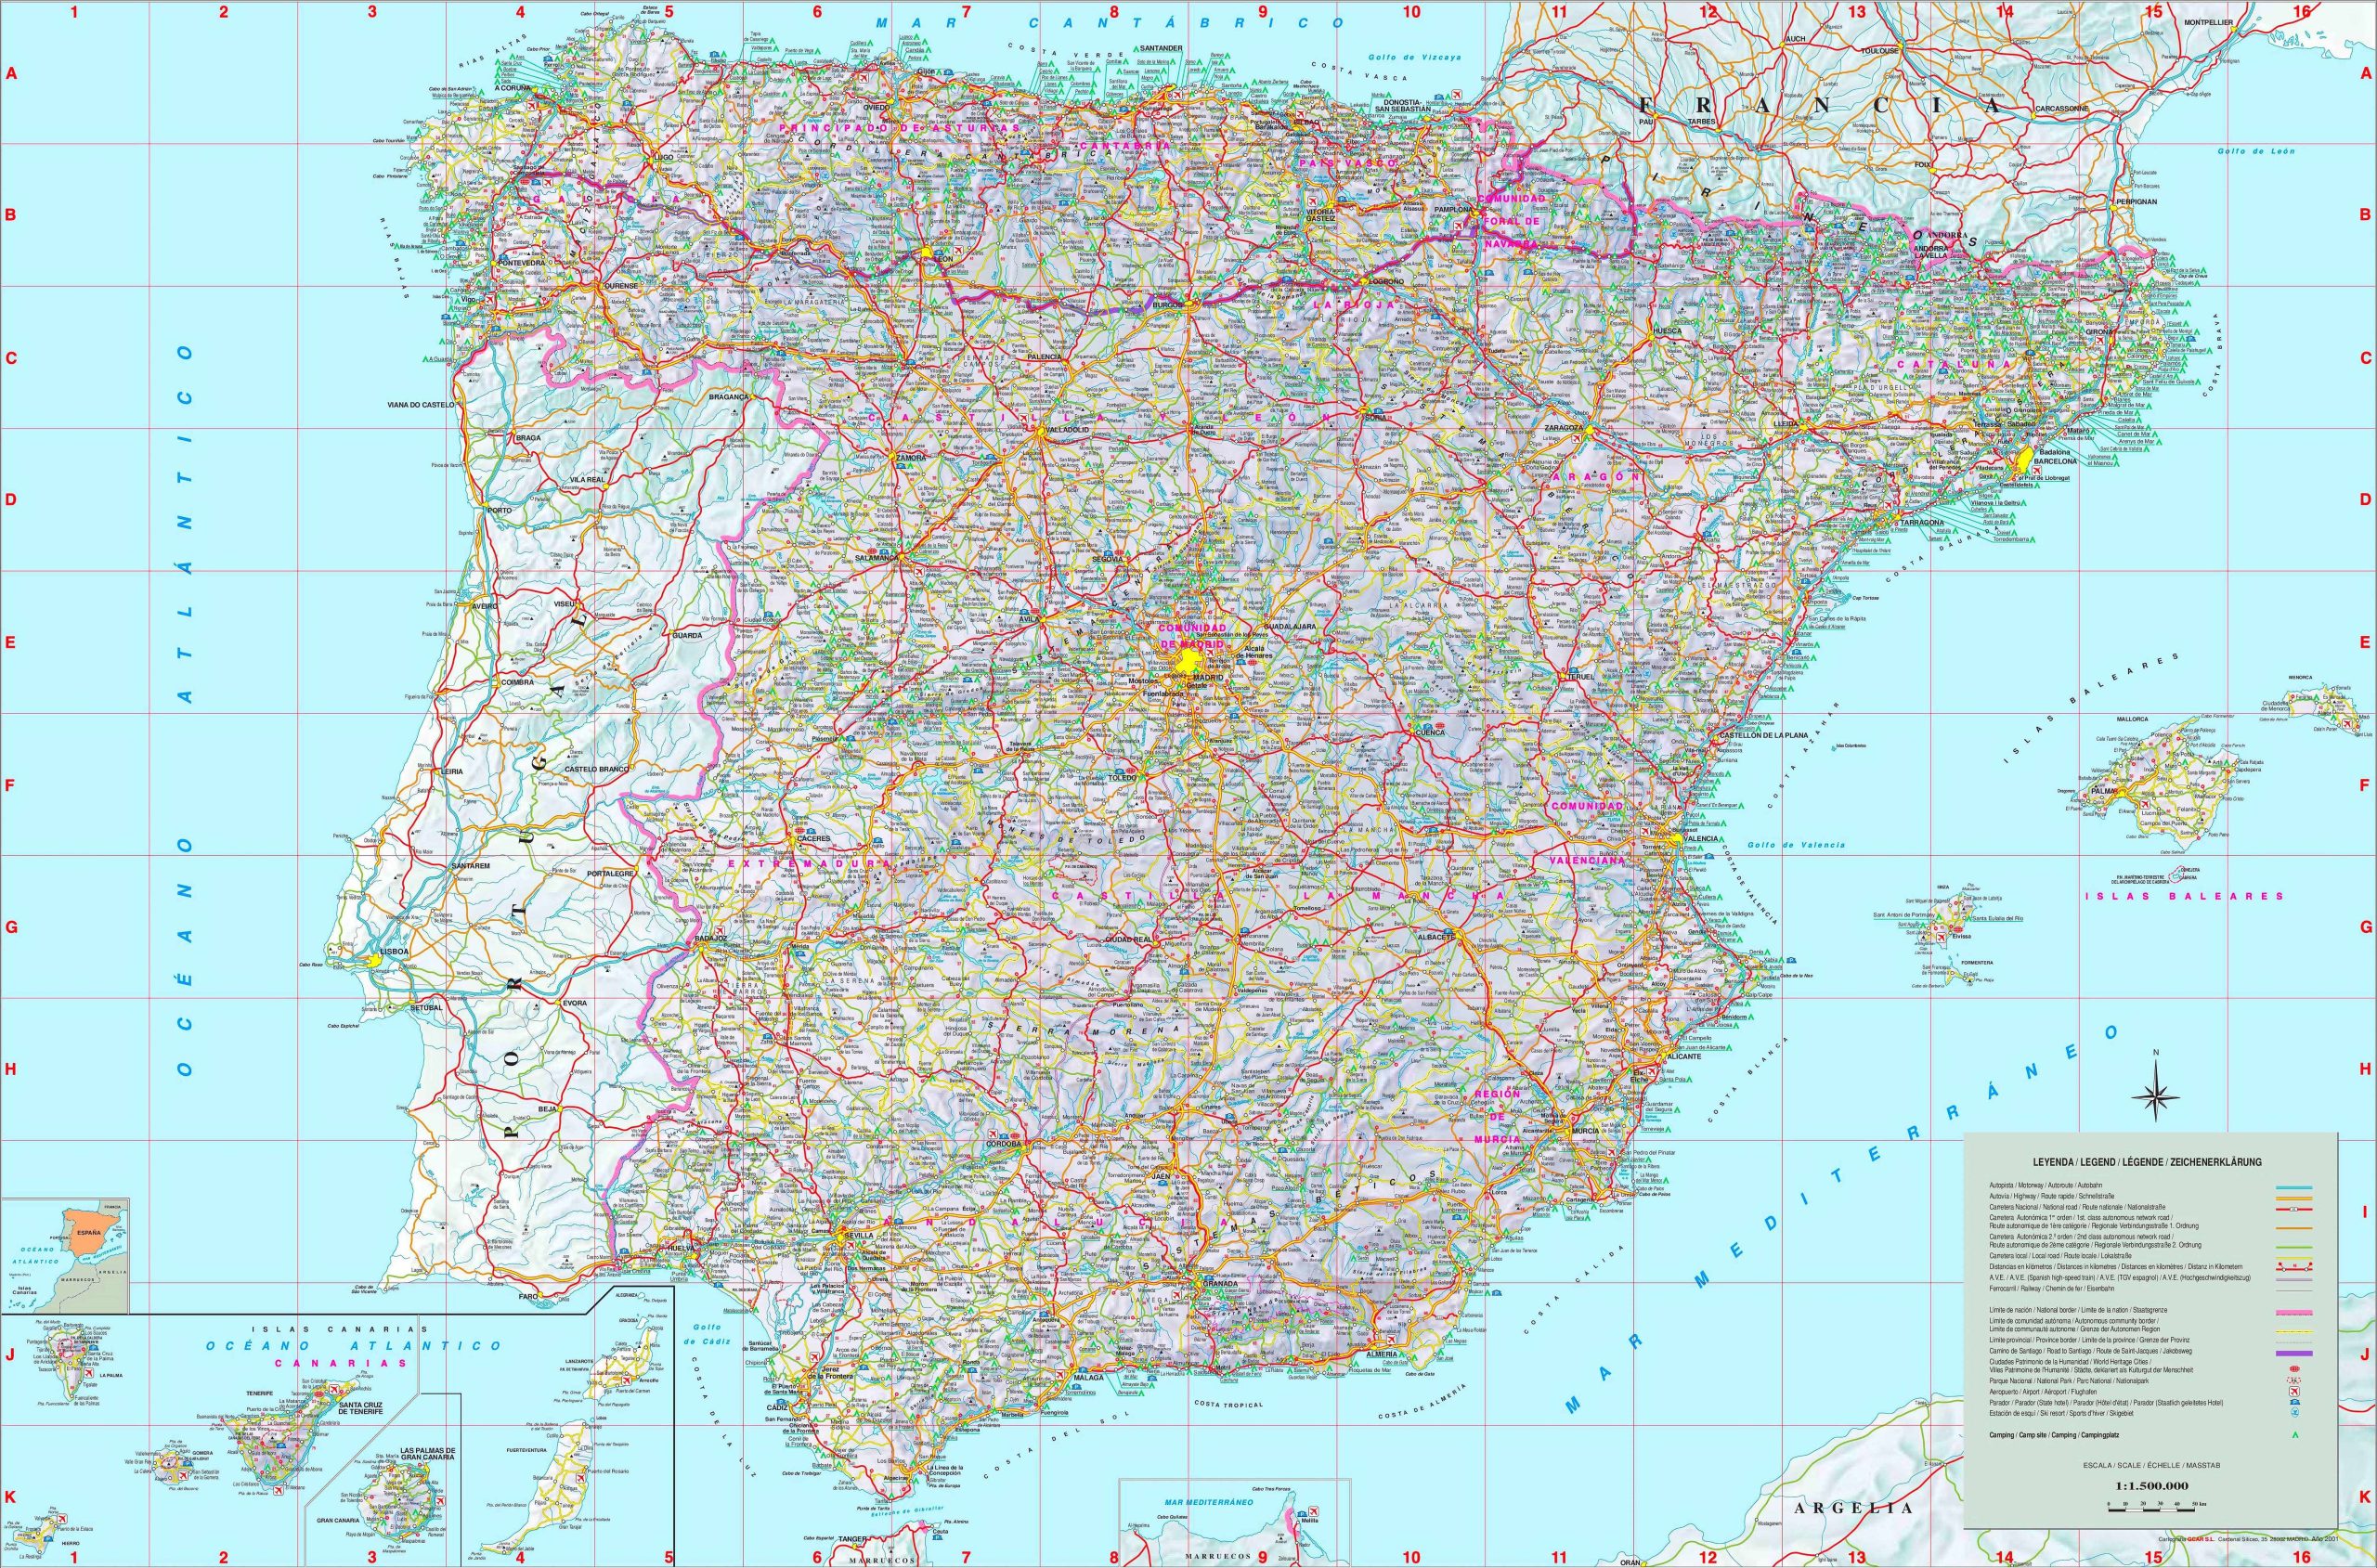 Detailed Map of Spain